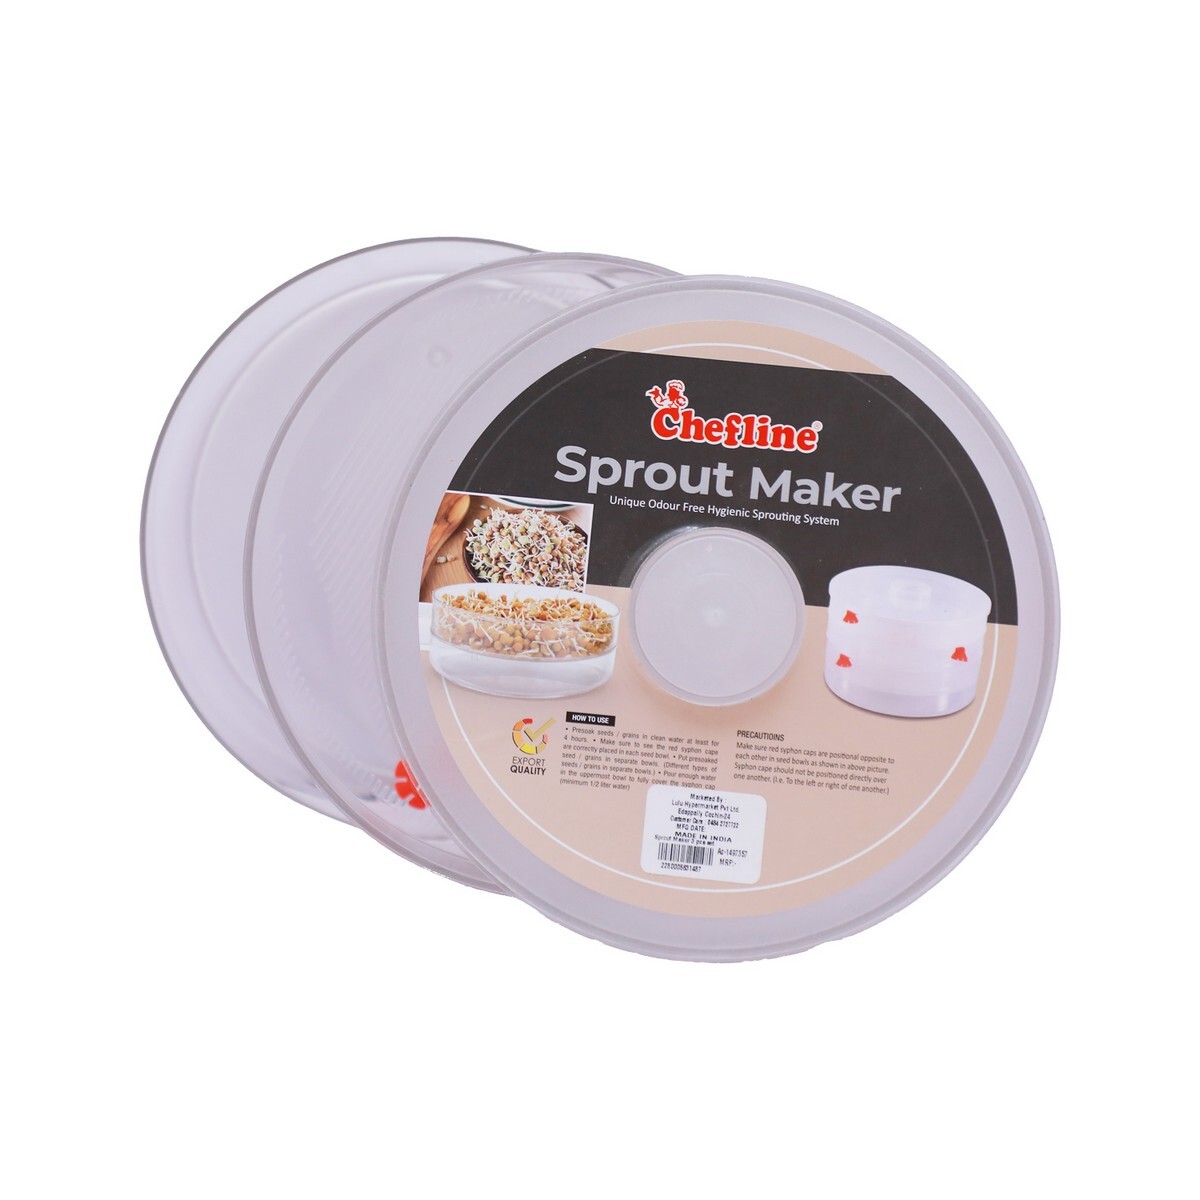 Chefline Sprout Maker 3pc